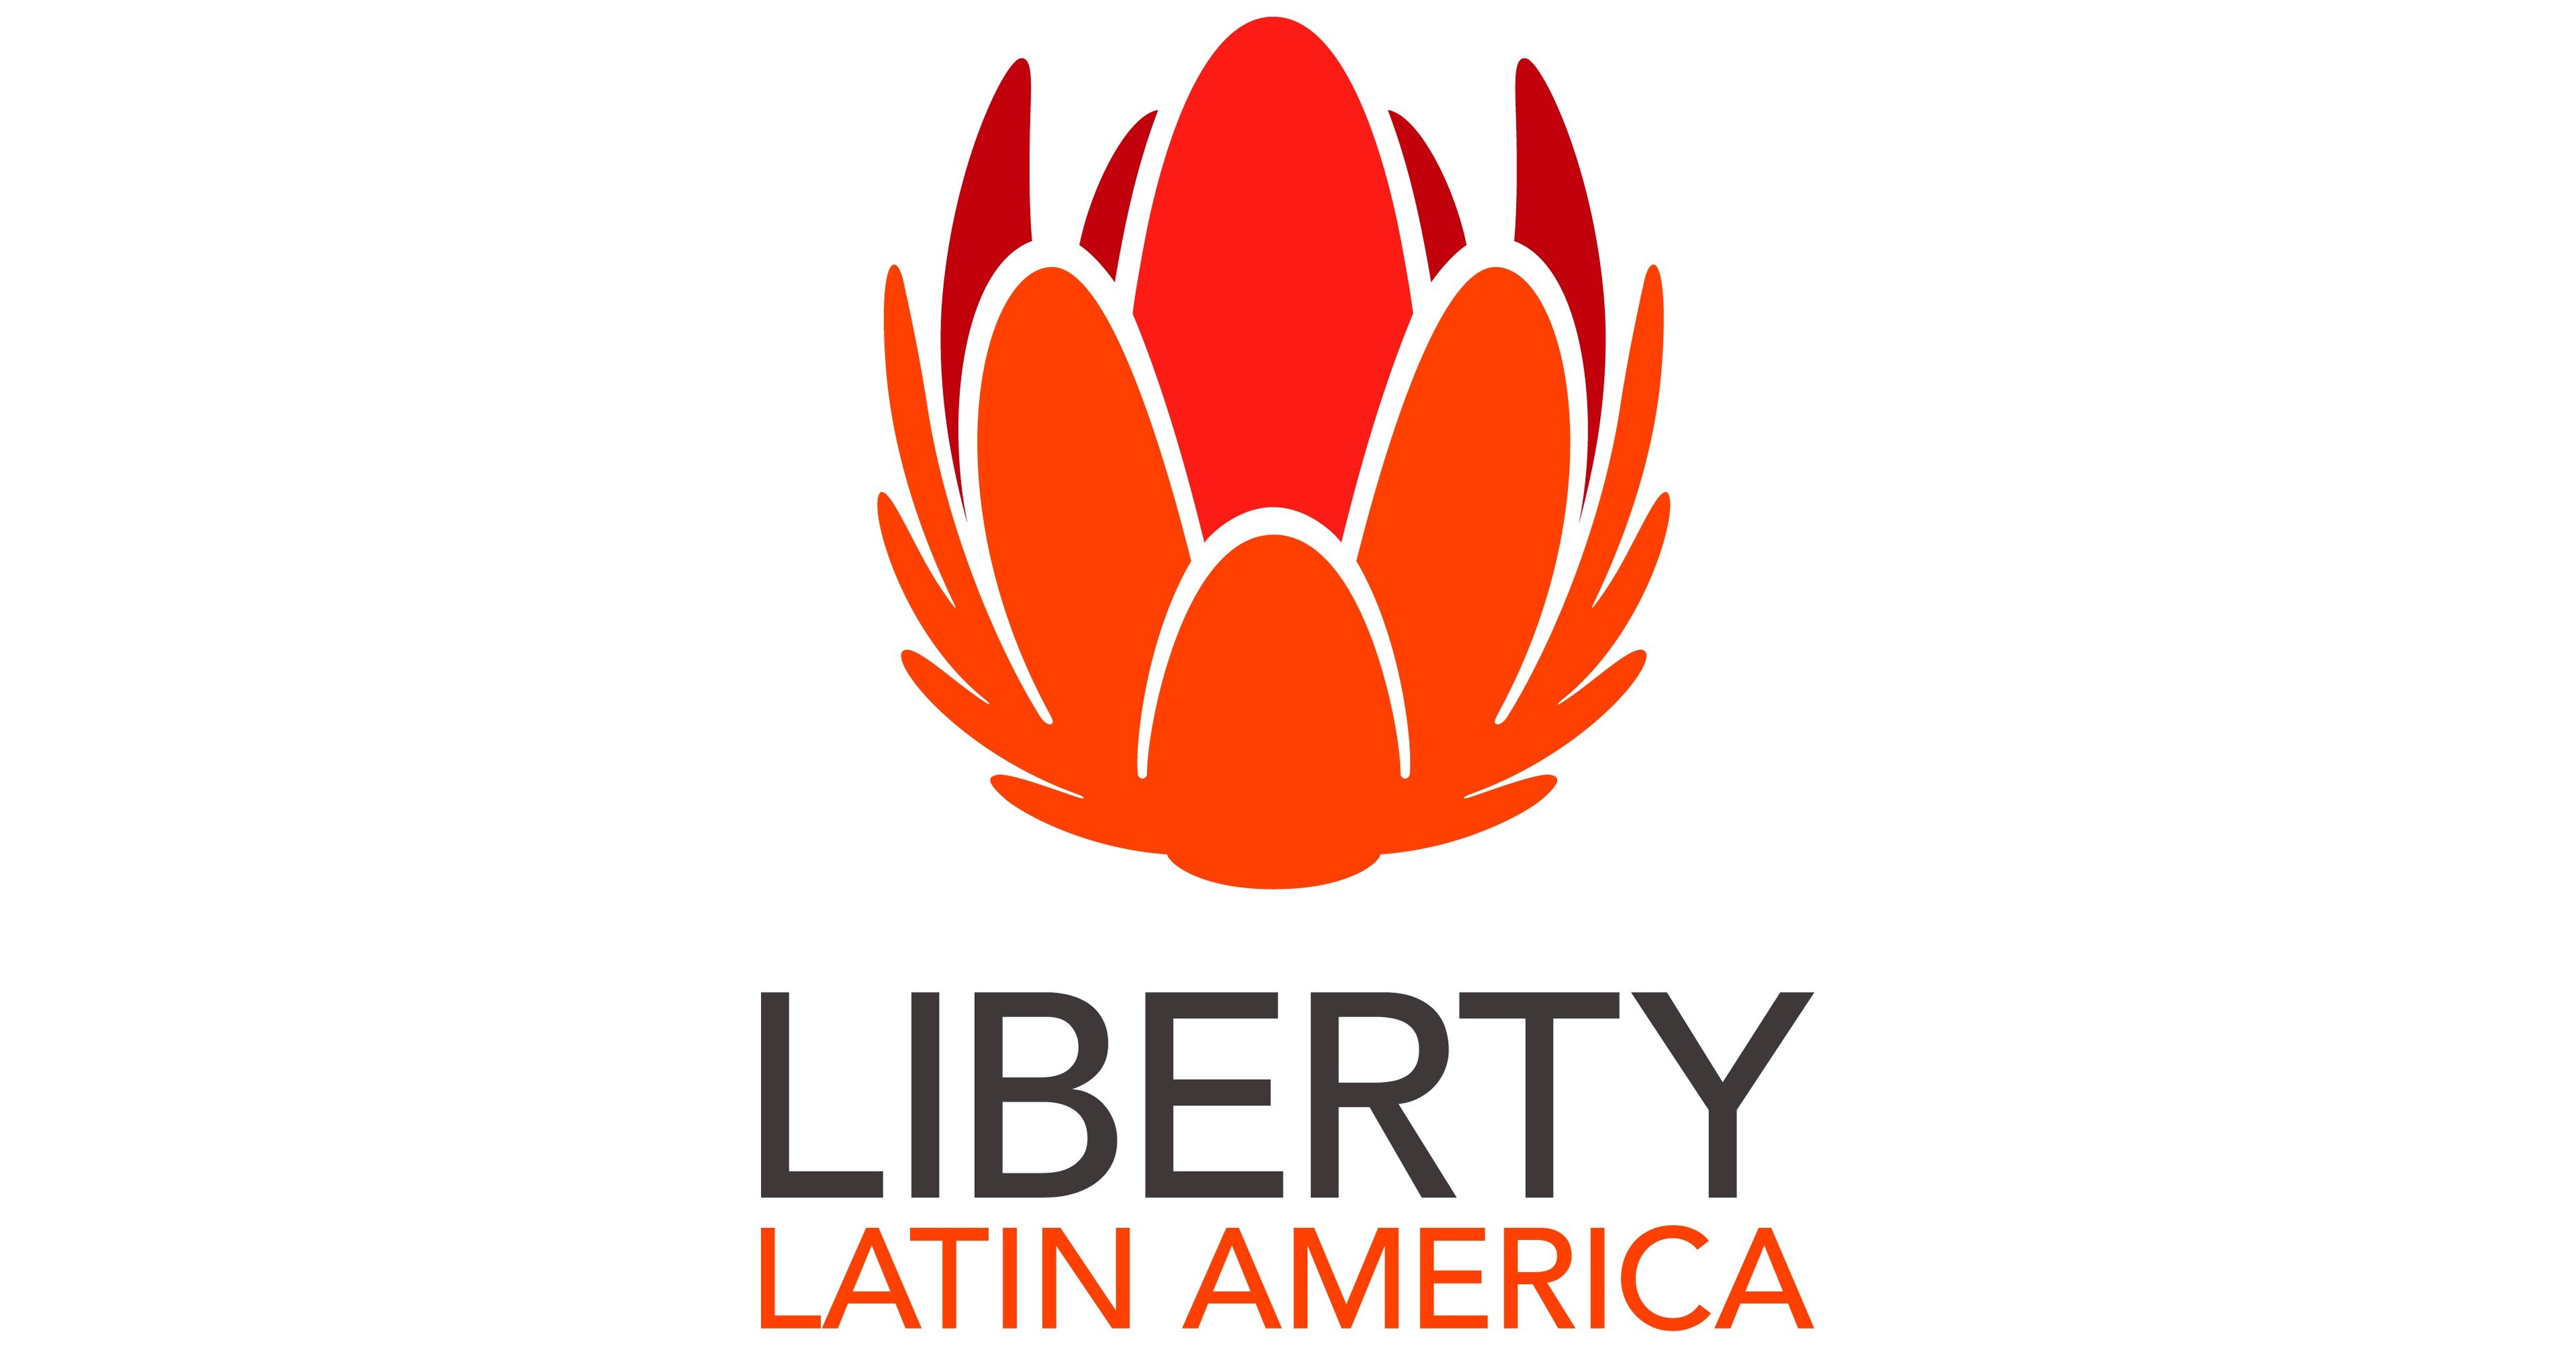 Liberty Latin America Partners with Plume to Deliver Next-Generation Smart Home Services in Puerto Rico